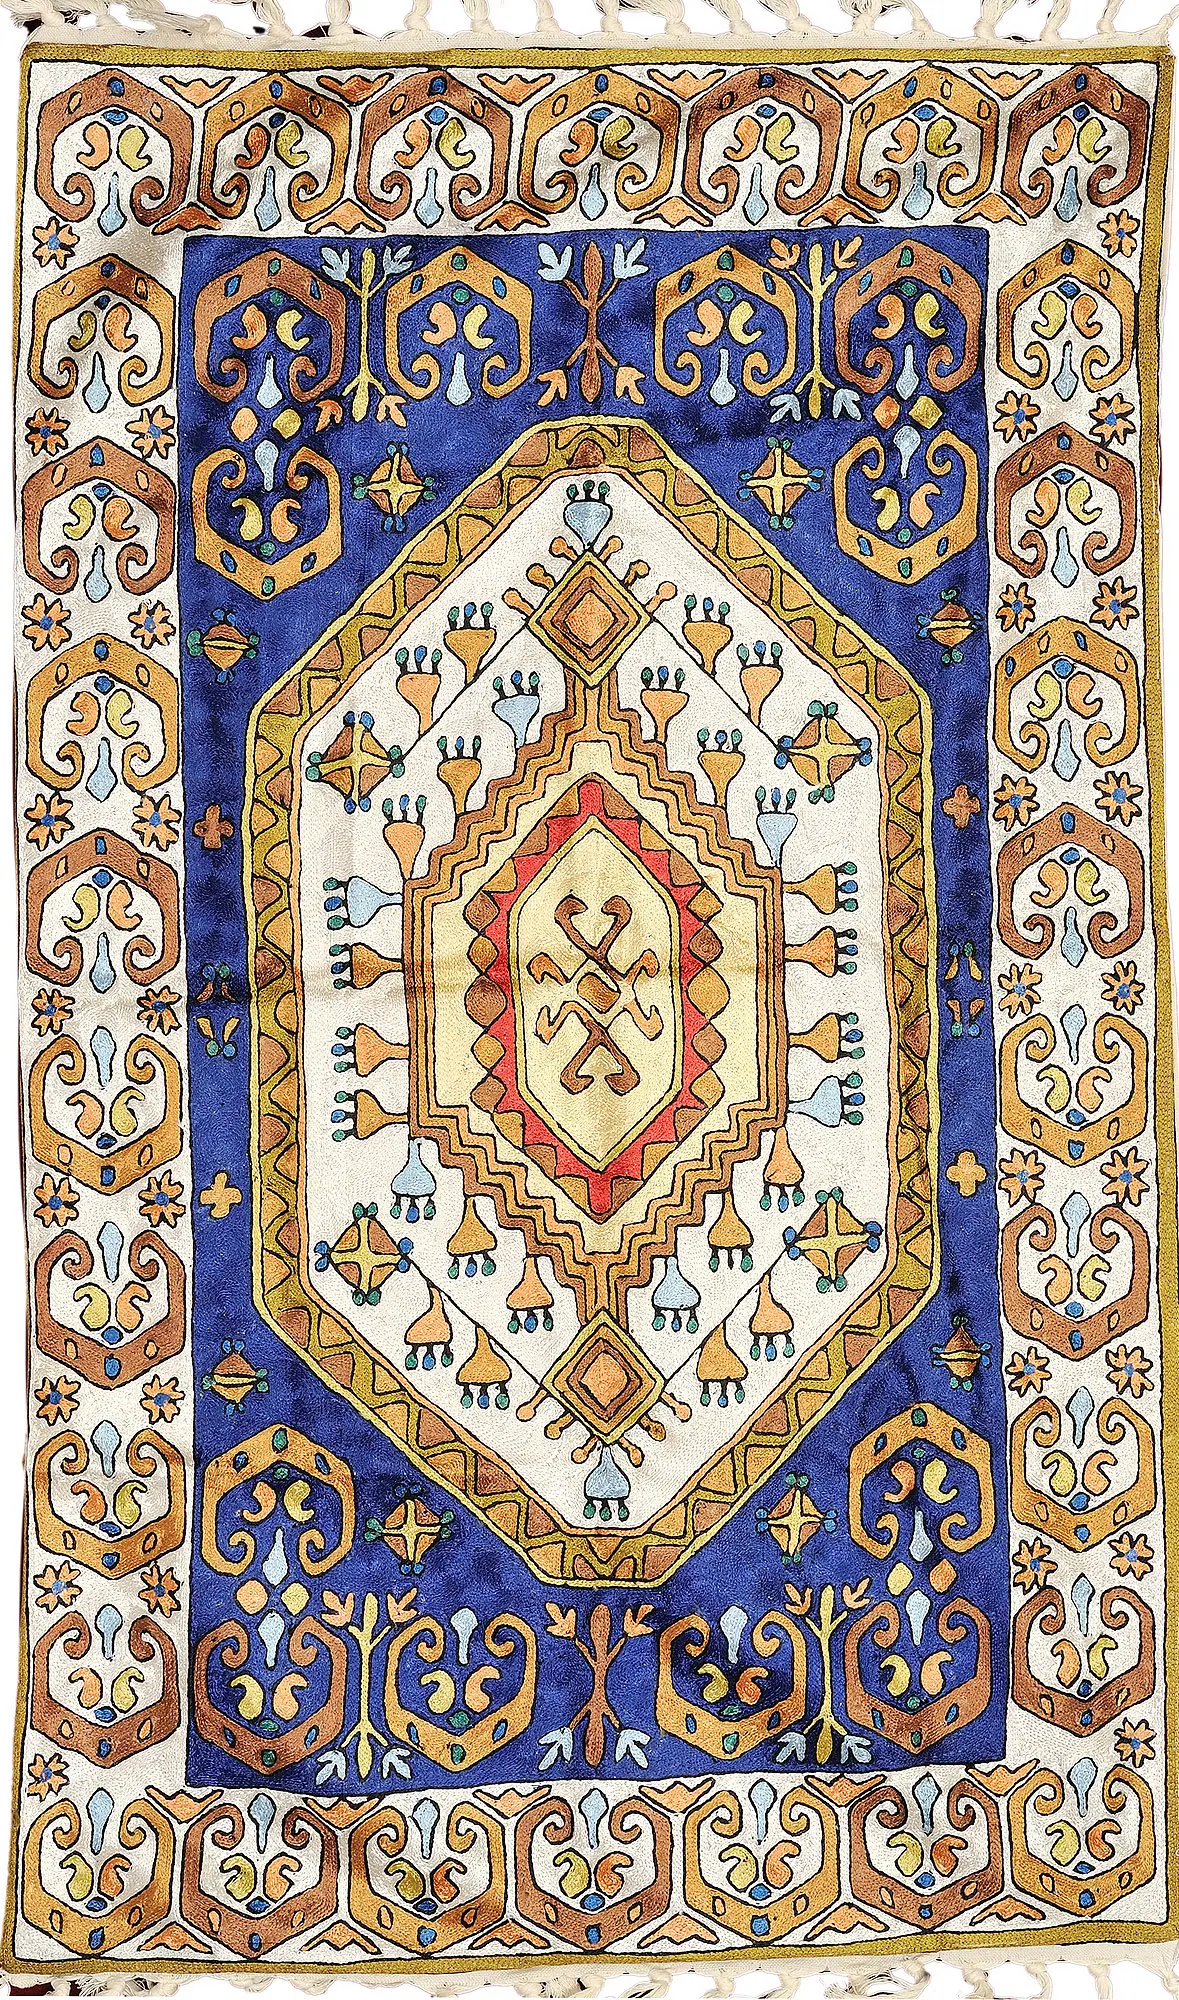 Resham on Canvas Blue and White Embroidered Asana Mat from Kashmir with Persian Design 